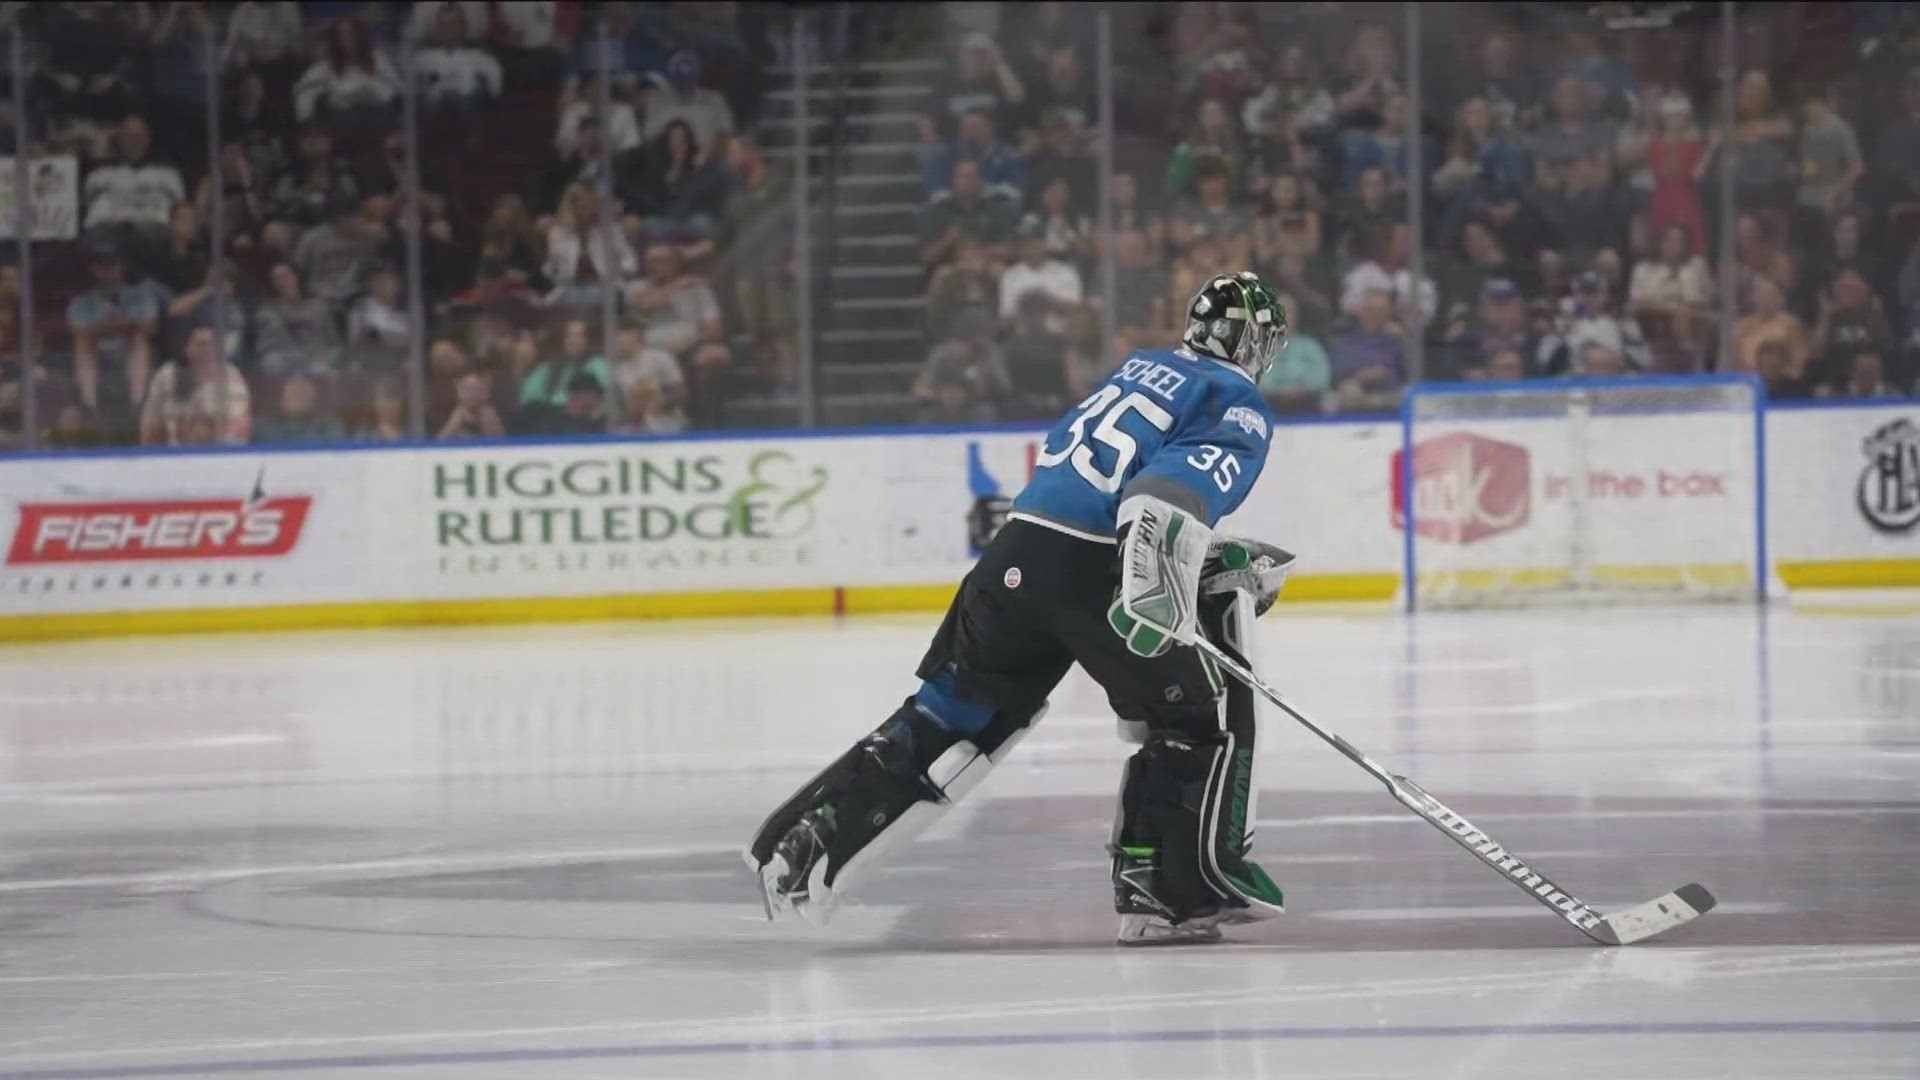 The Steelheads find themselves in a familiar position through two games of the ECHL Kelly Cup Finals, down 2-0 in a series that has been dominated by the Florida.